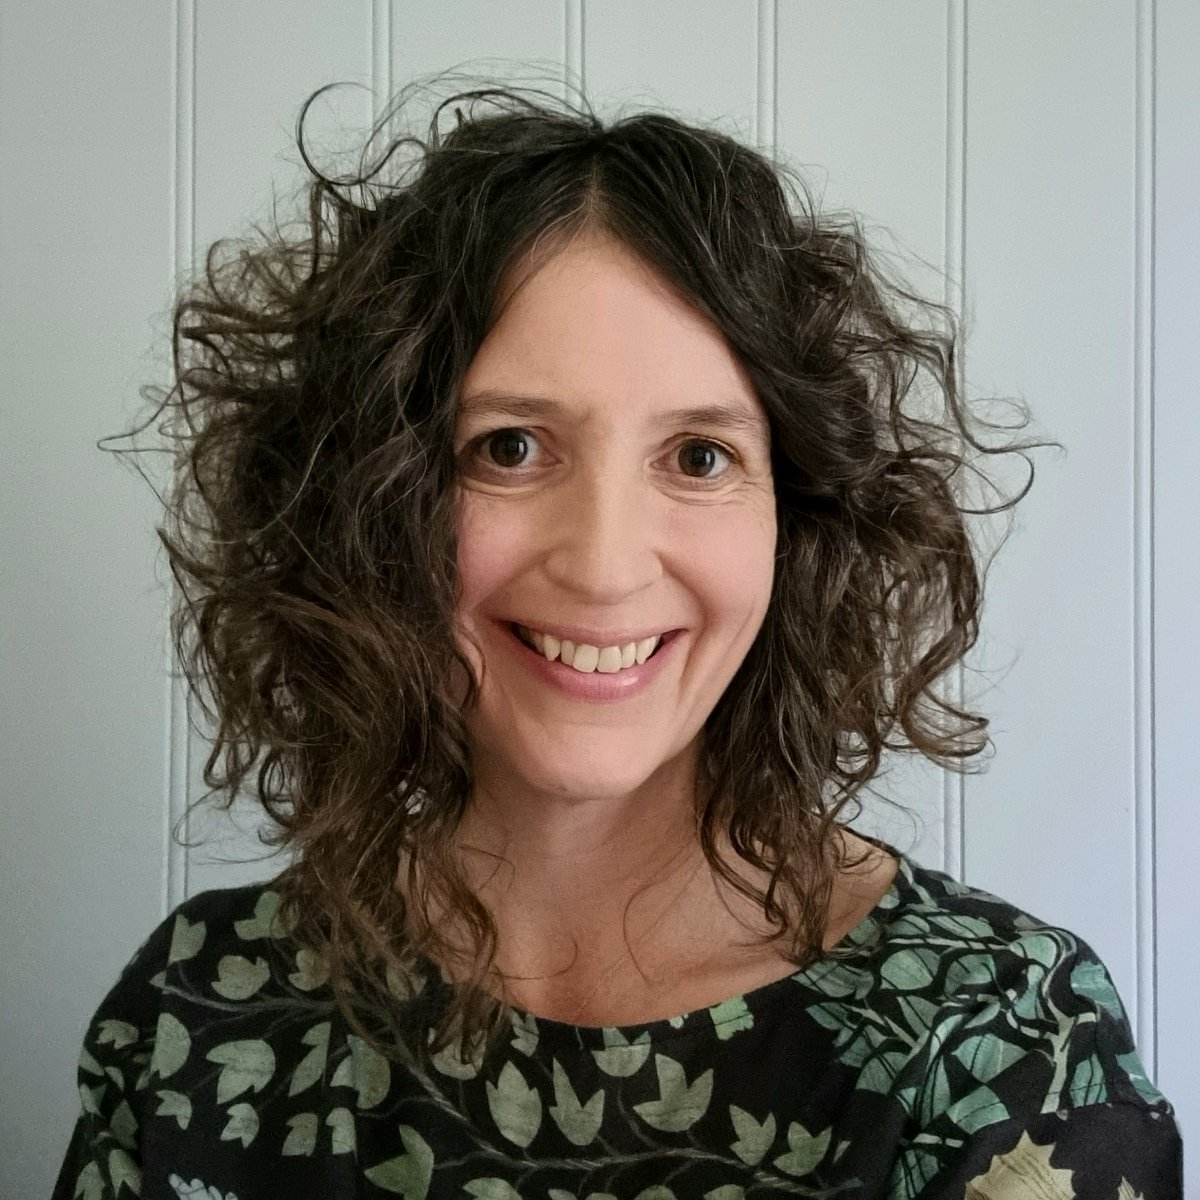 In the latest instalment of our Spotlight Series we talk to Prof @lizstokoe about her fascinating research - check it out! lse.ac.uk/PBS/News/Spotl…

#research #partofLSE #ConversationAnalysis #SpotlightSeries